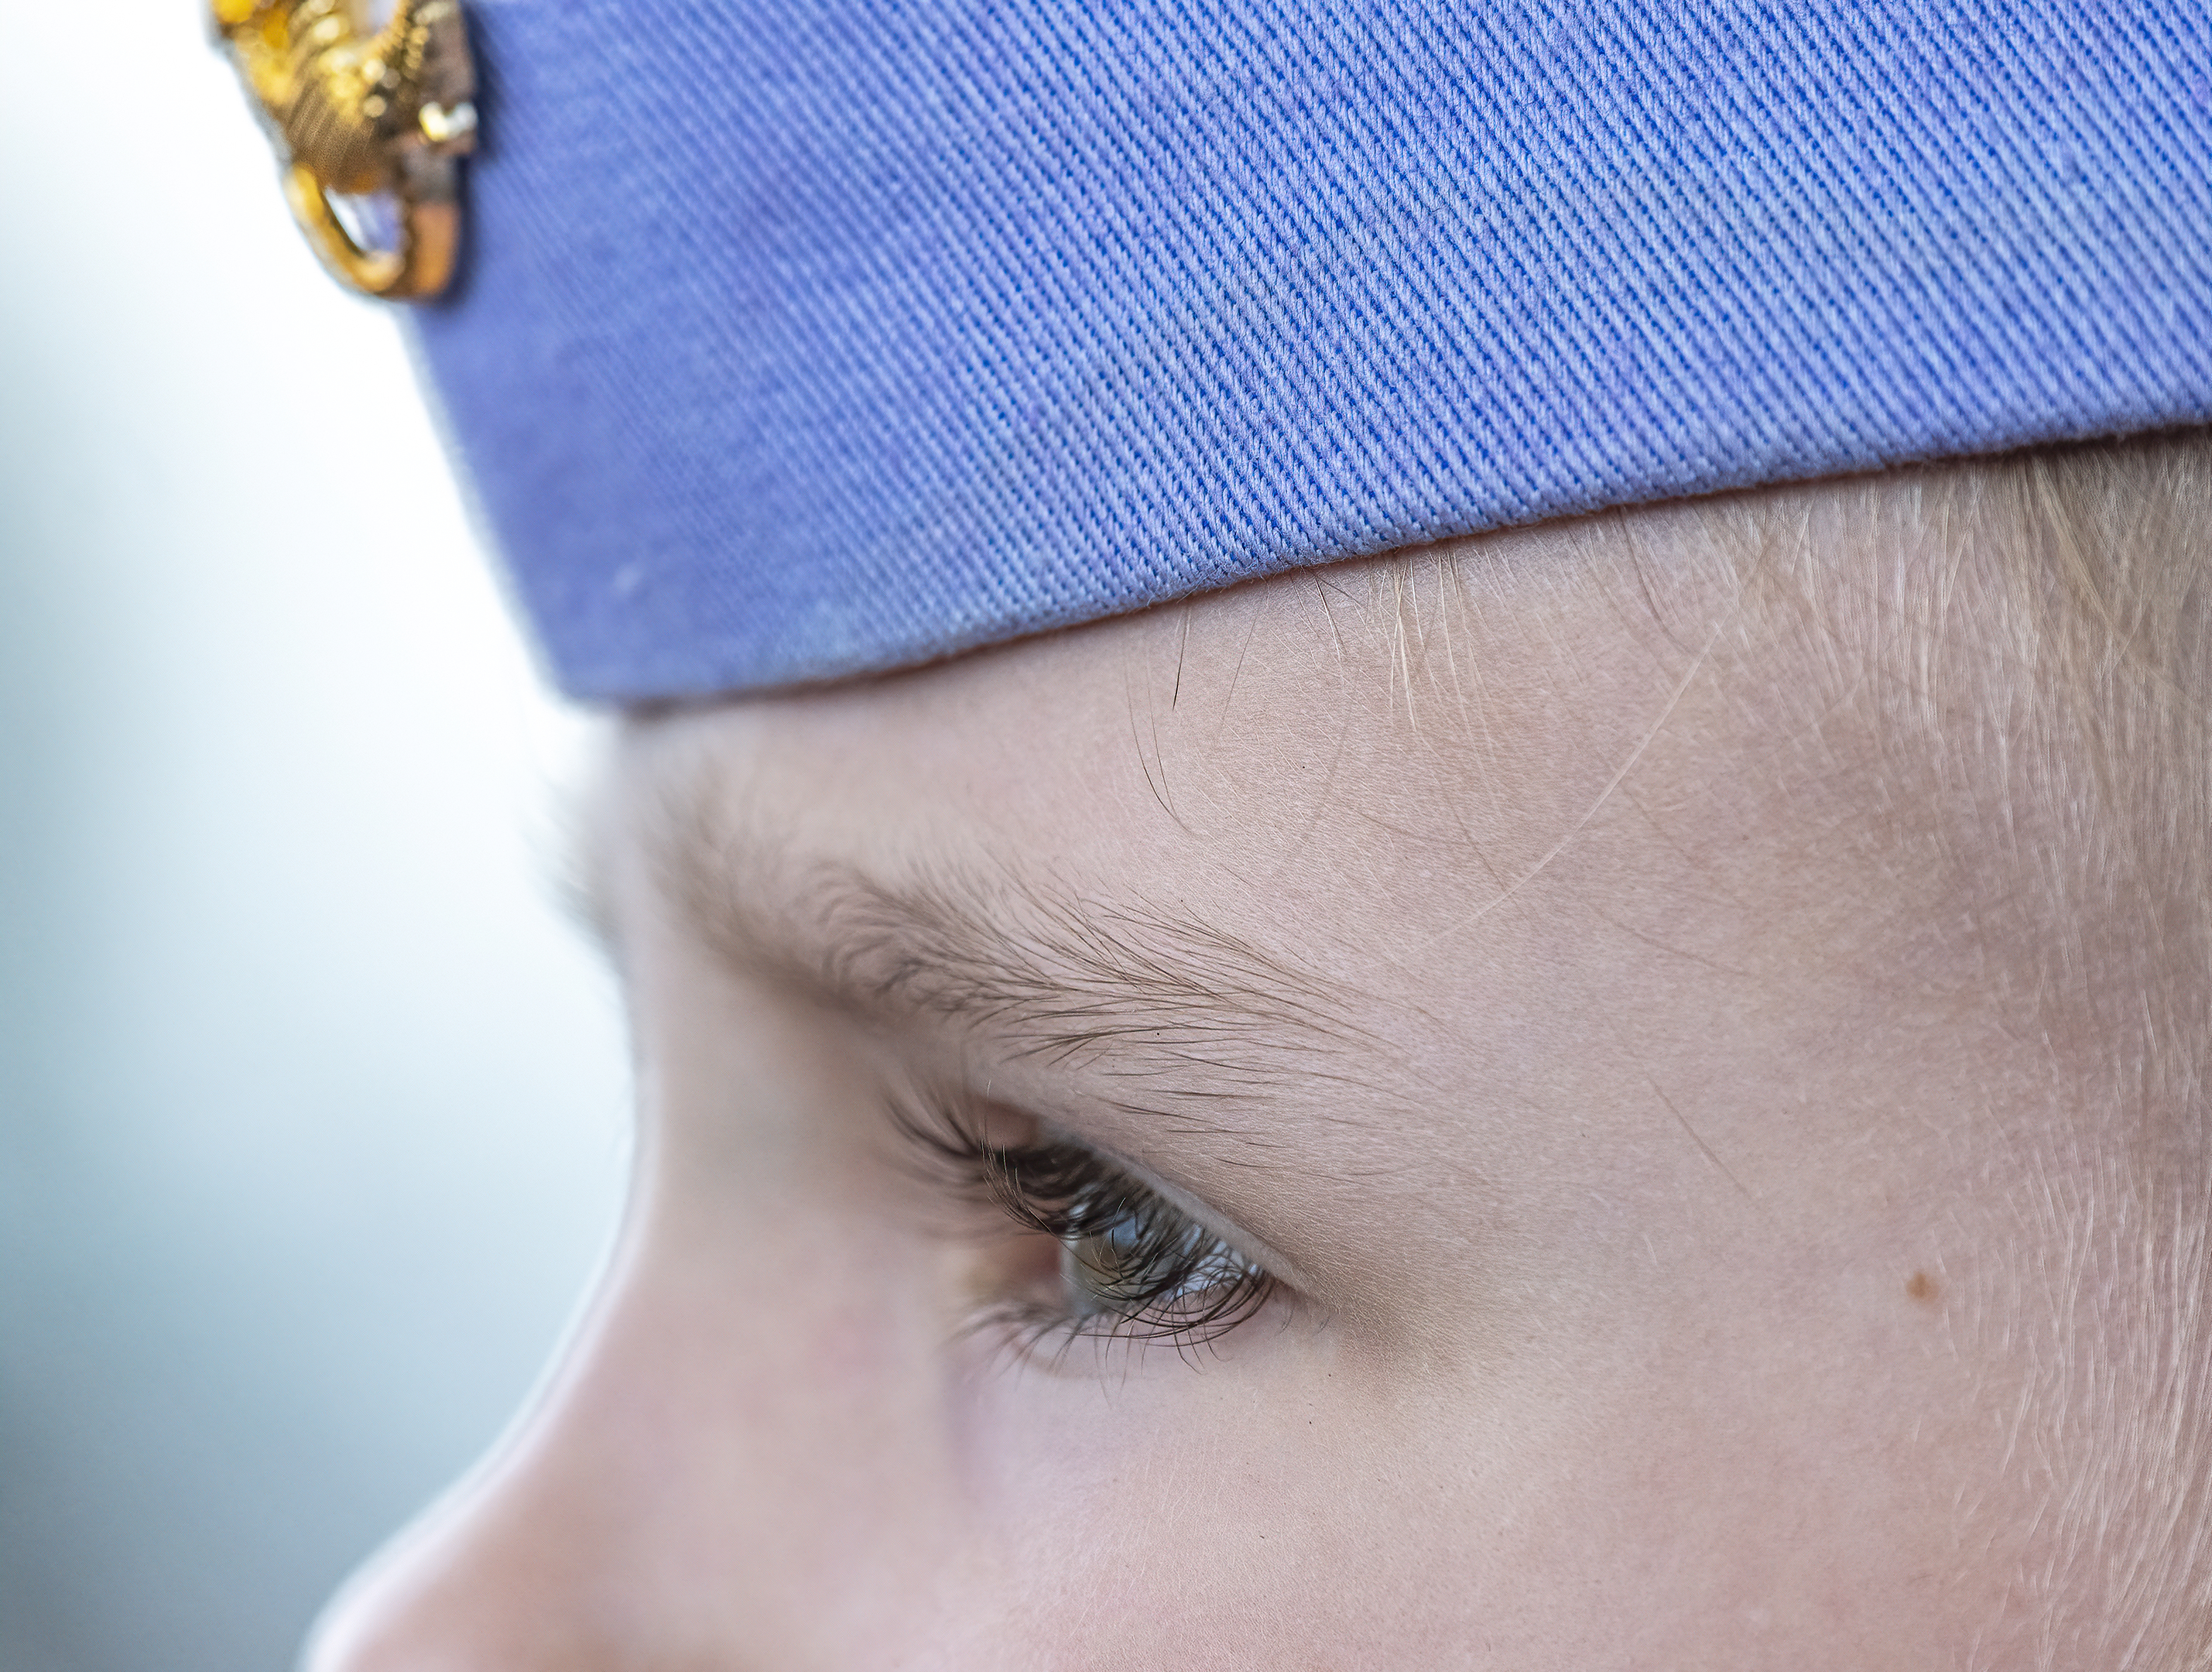 eye russian child day of the russian navy-clear